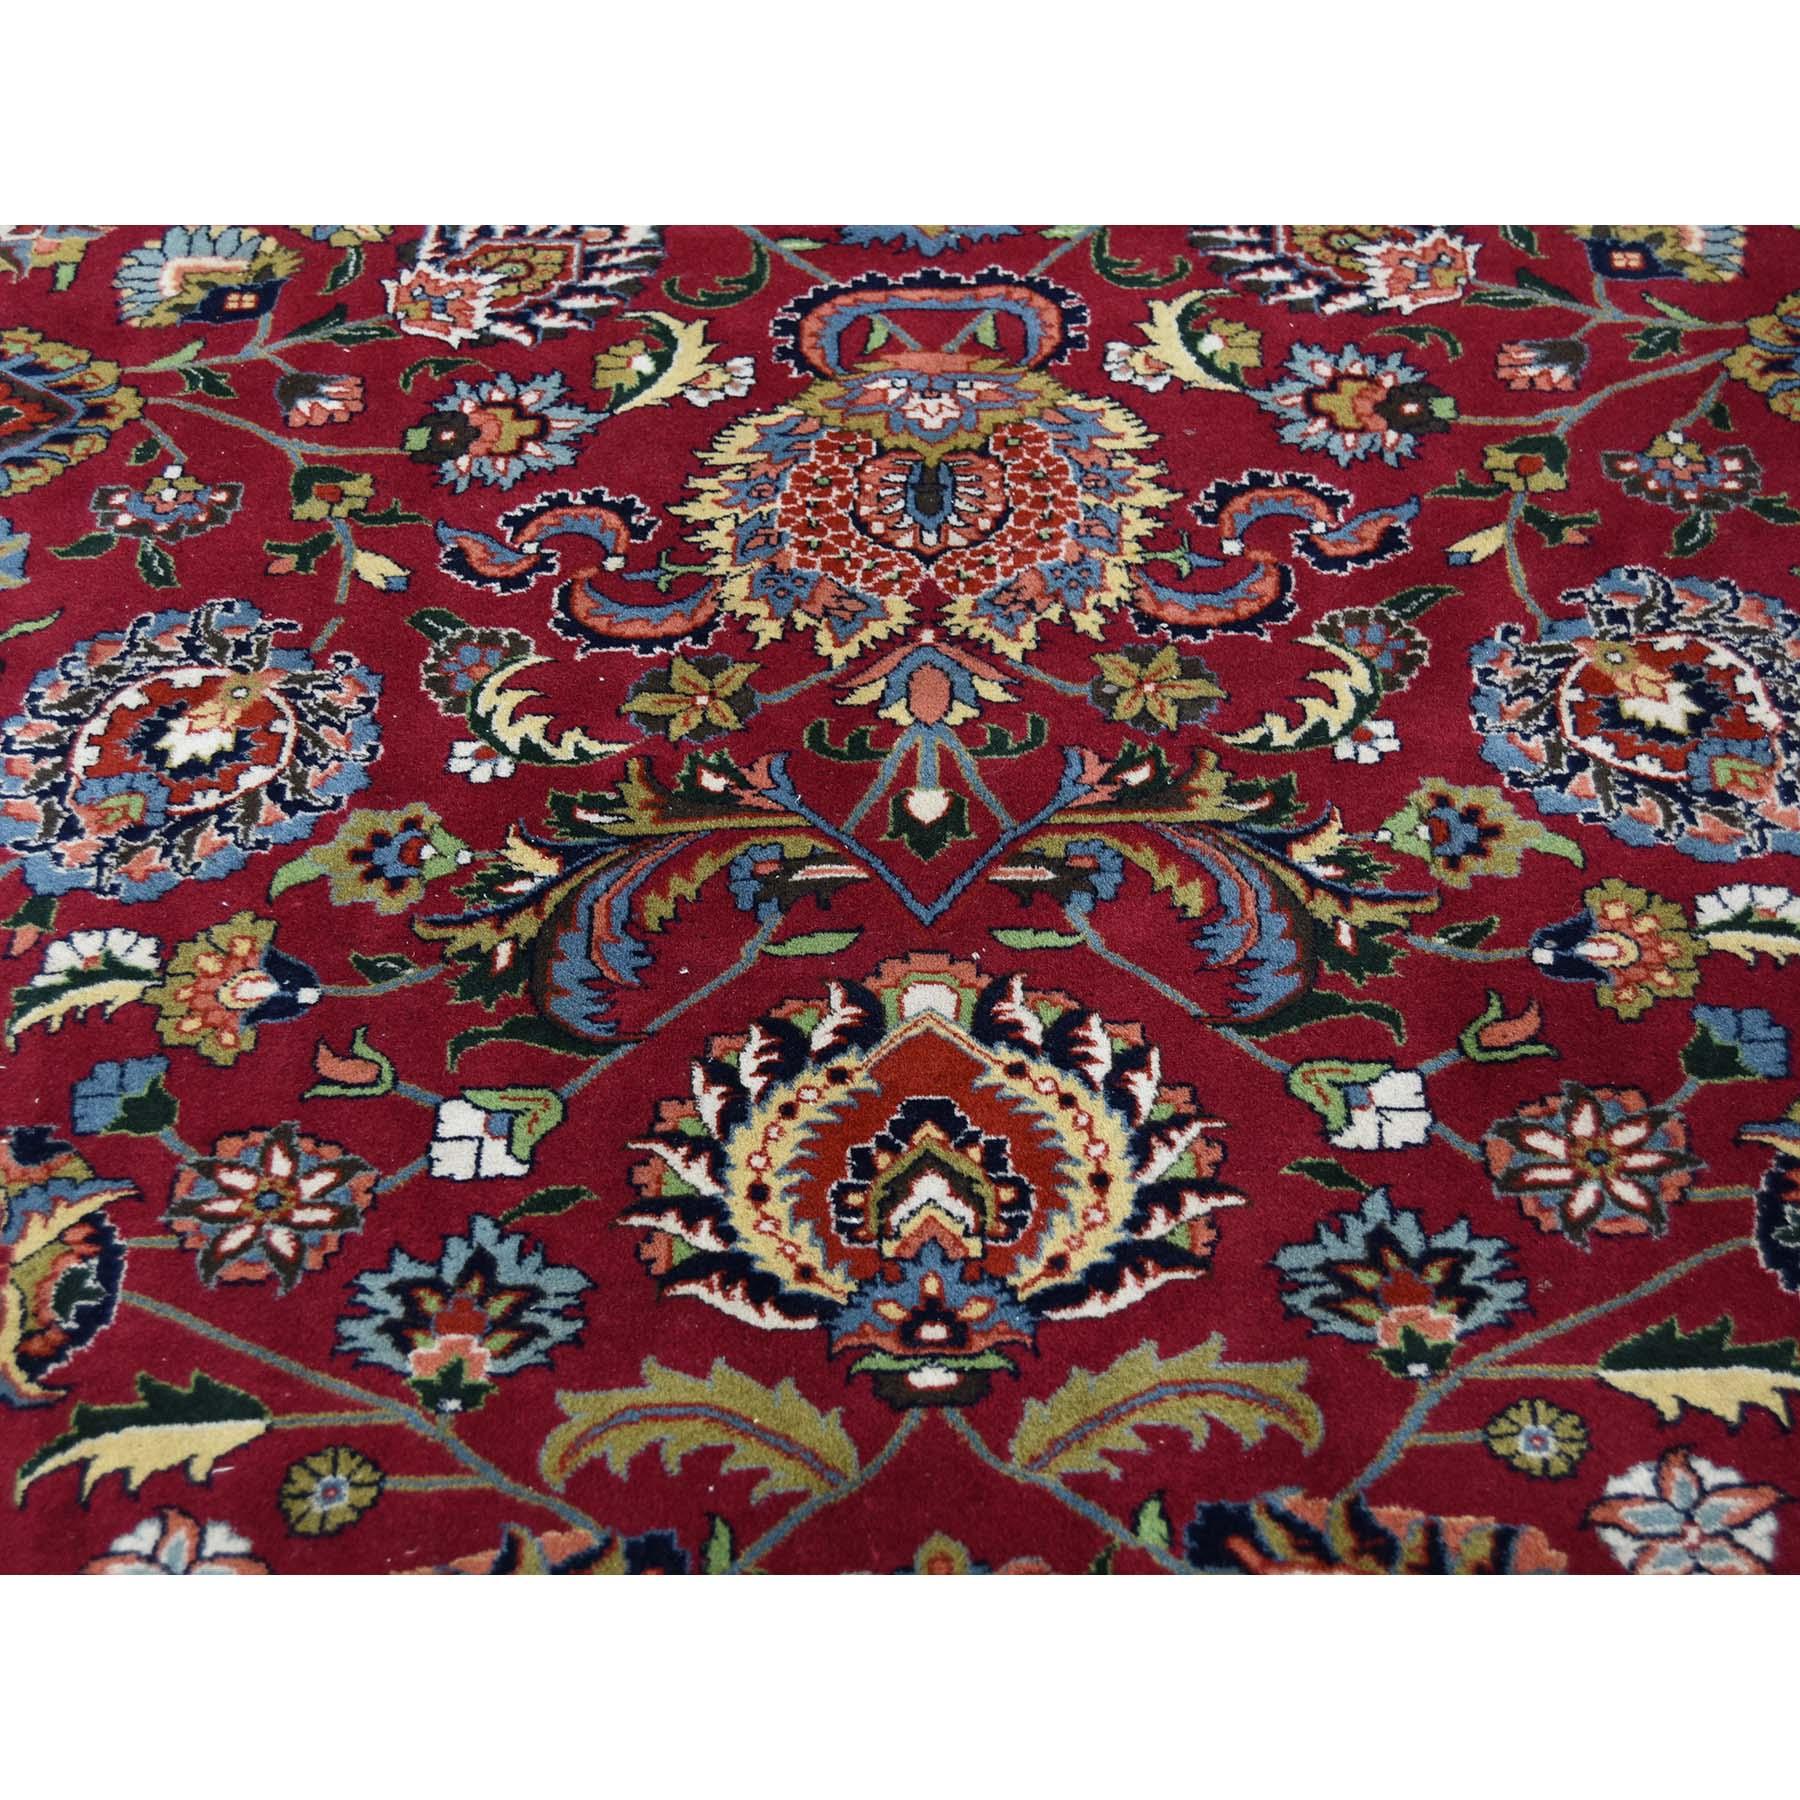 Persian Mashad 300 Kpsi High Quality Oversize Hand-Knotted Oriental Rug, 12'0